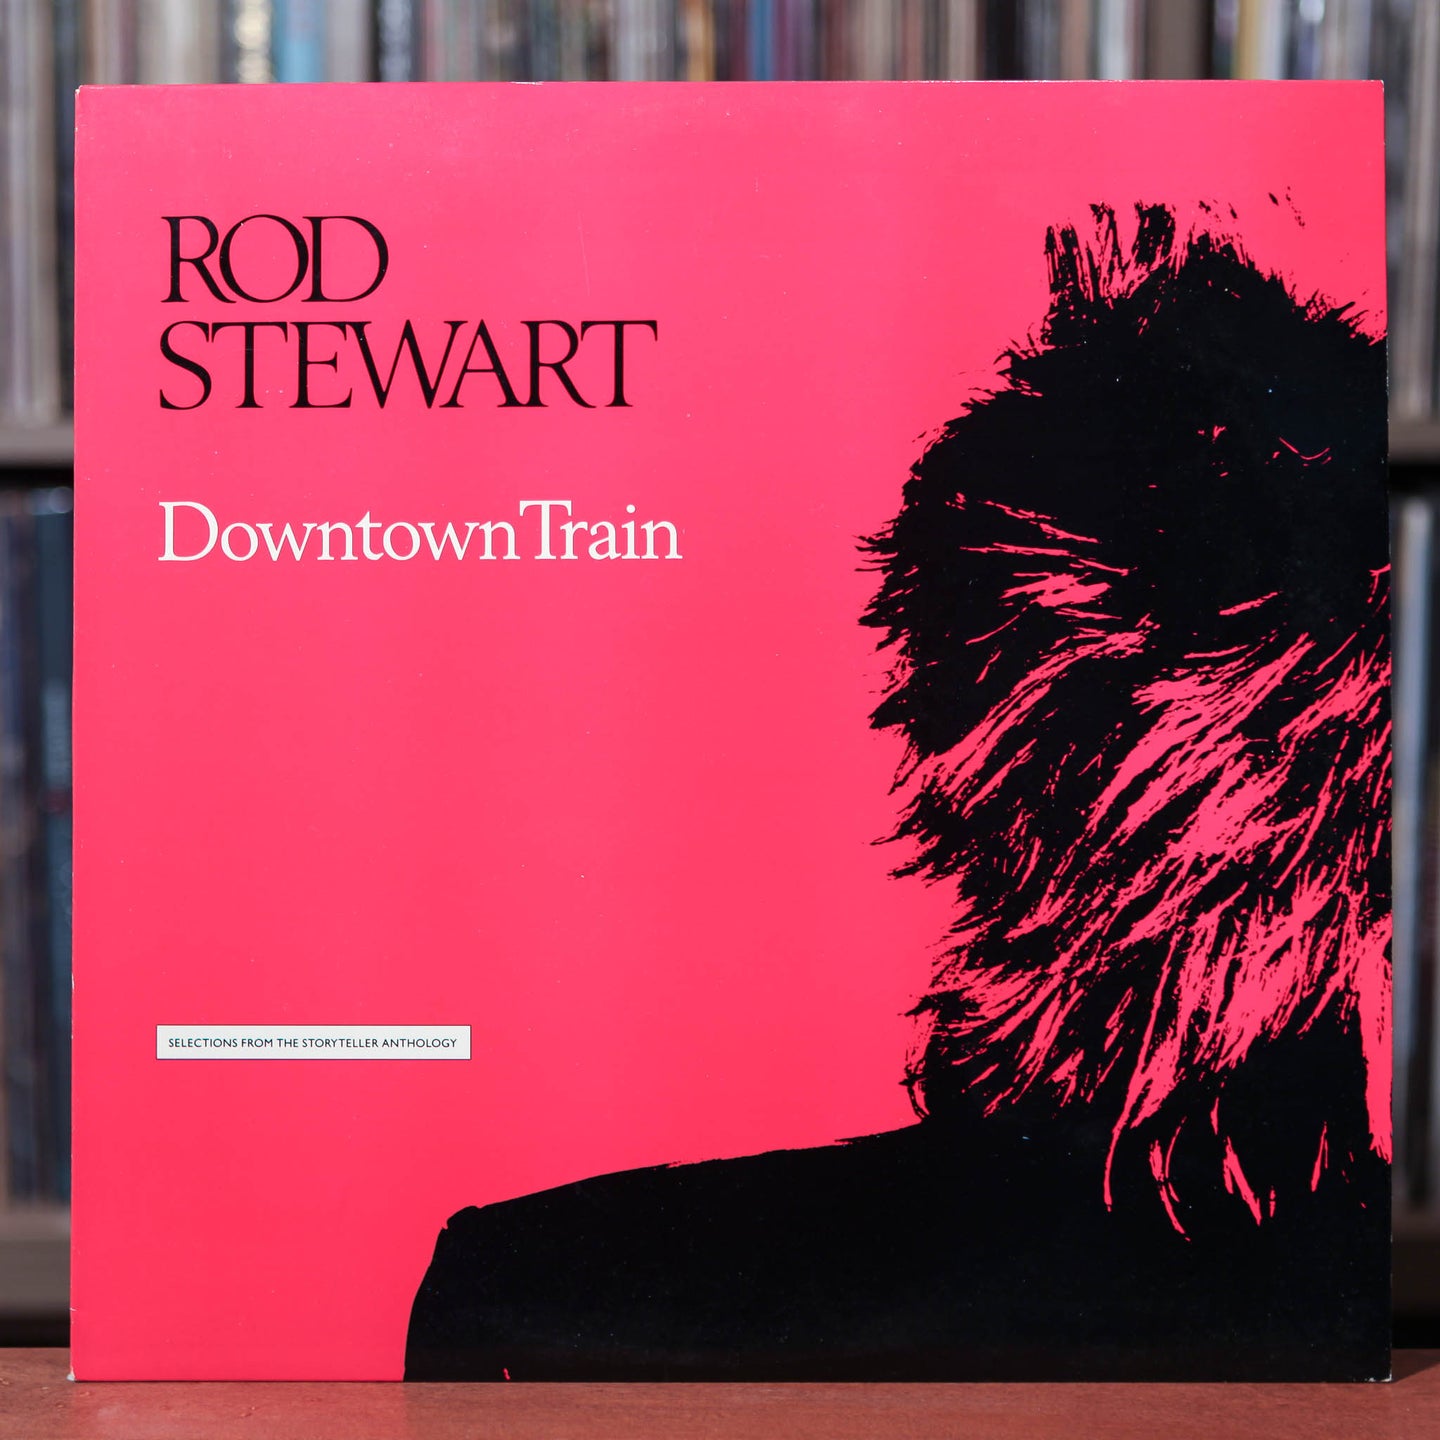 Rod Stewart - Downtown Train (Selections From The Storyteller Anthology) - 1990 Warner, EX/EX